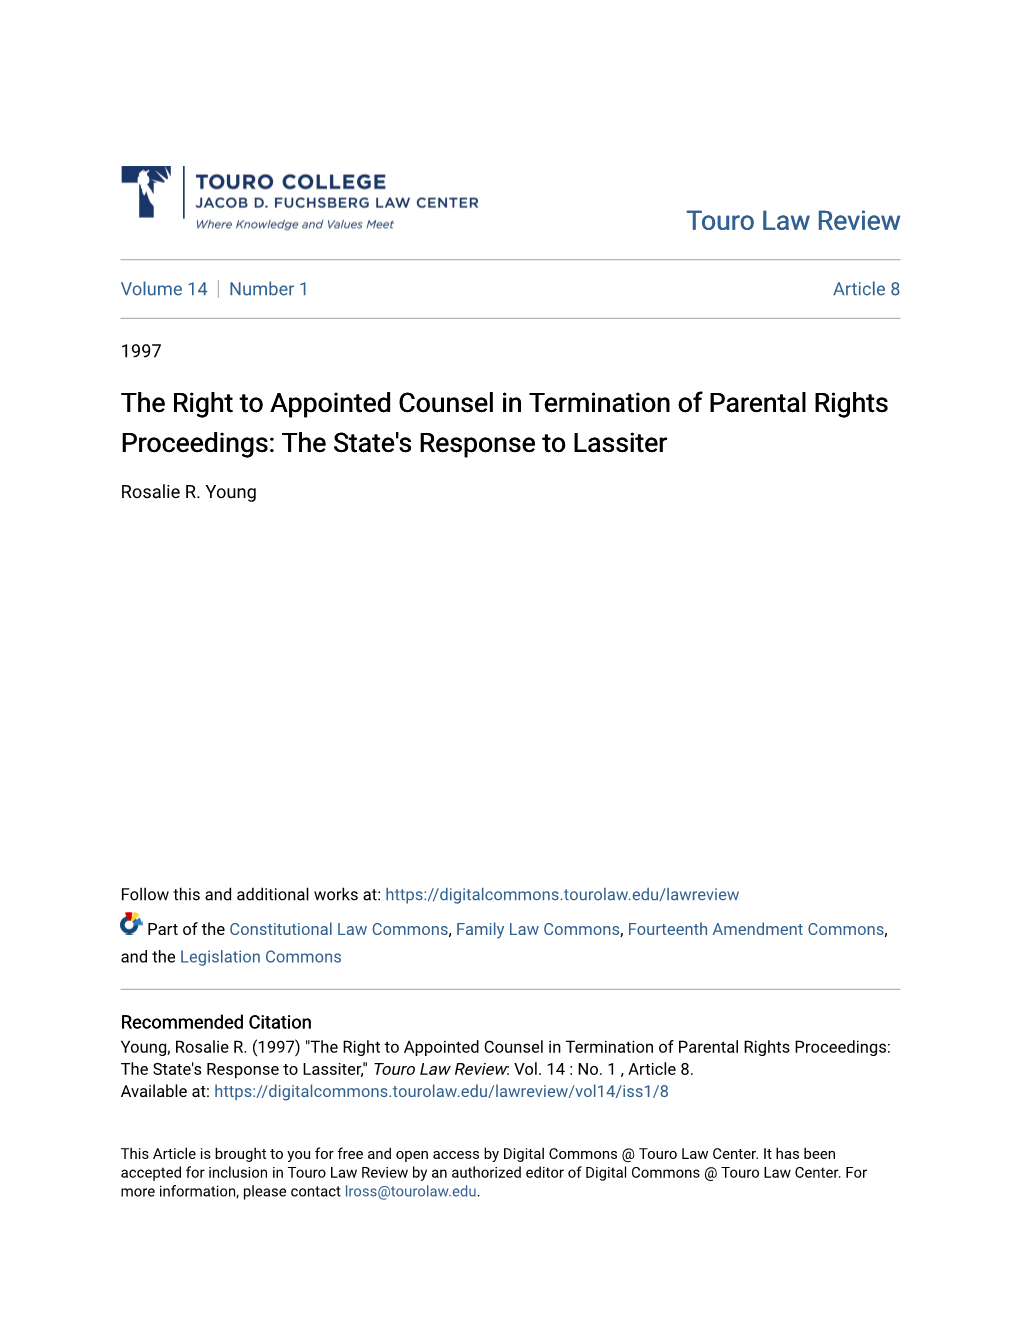 The Right to Appointed Counsel in Termination of Parental Rights Proceedings: the State's Response to Lassiter